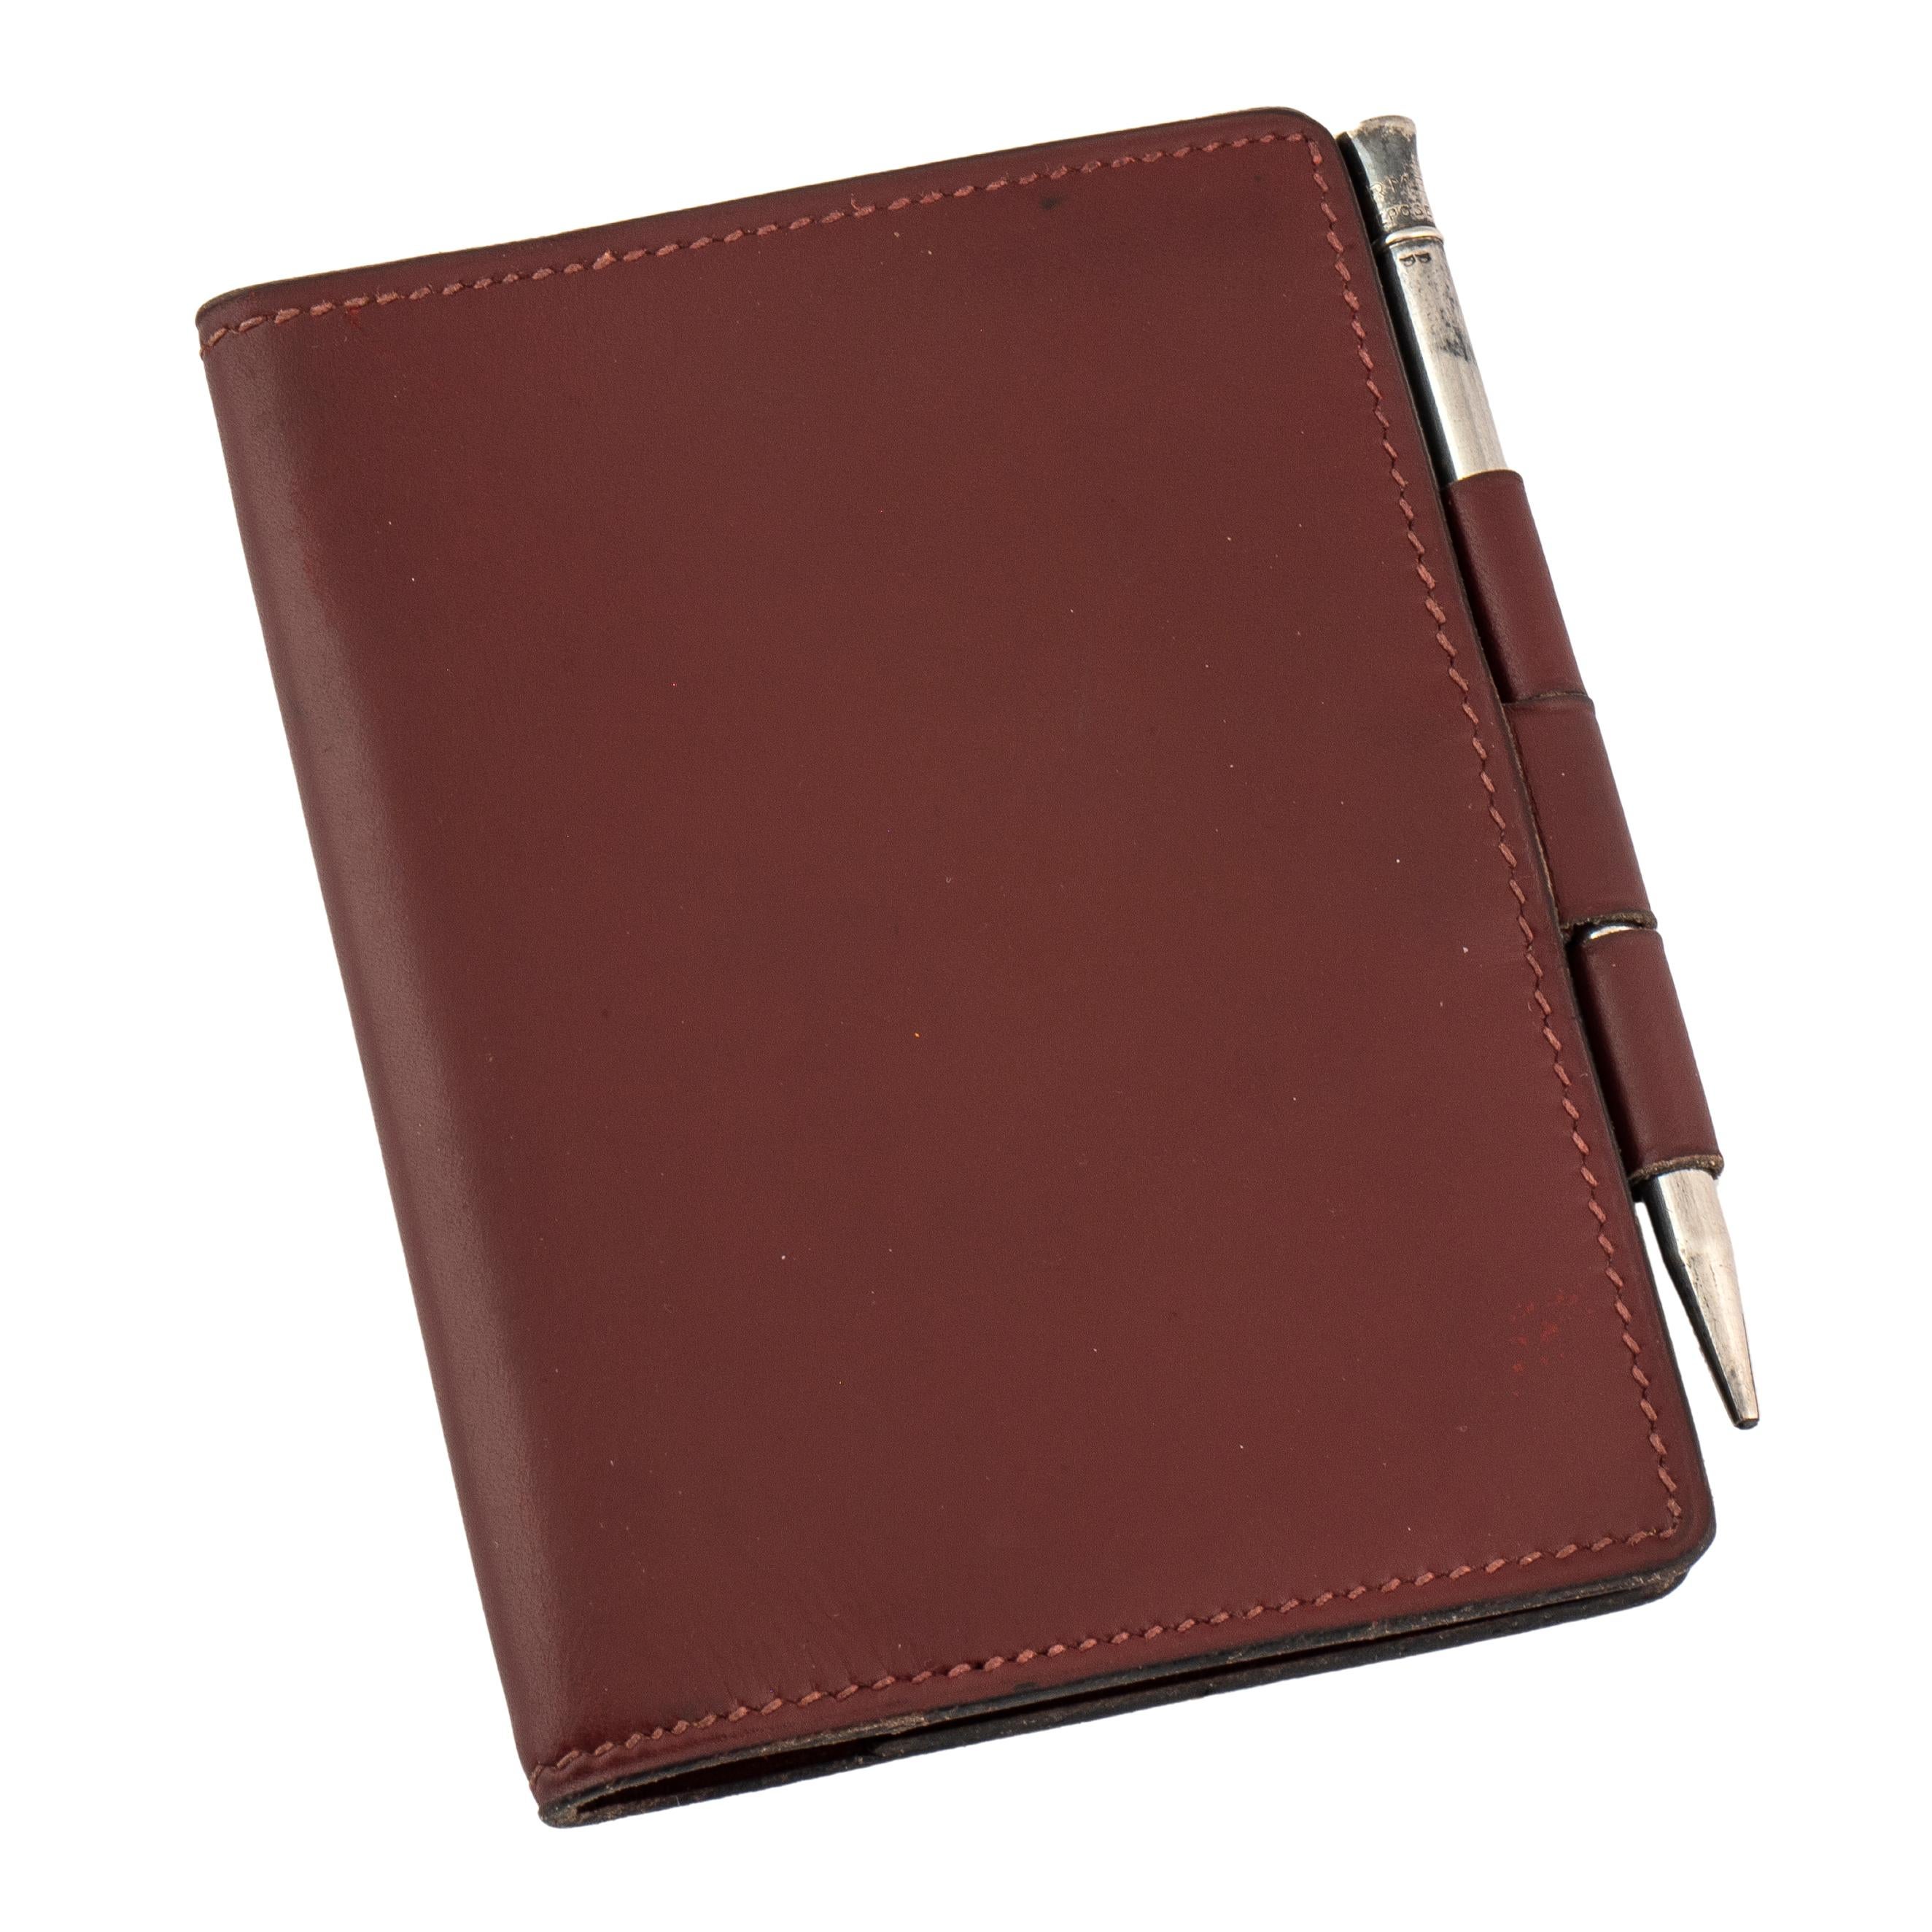 Beautiful vintage Hermès mini notebook agenda cover tooled out of the classic burgundy leather associated with the iconic Parisian luxury brand, with stiched borders and original silver pencil holder.  The leather stamped Hermès Paris, the pencil